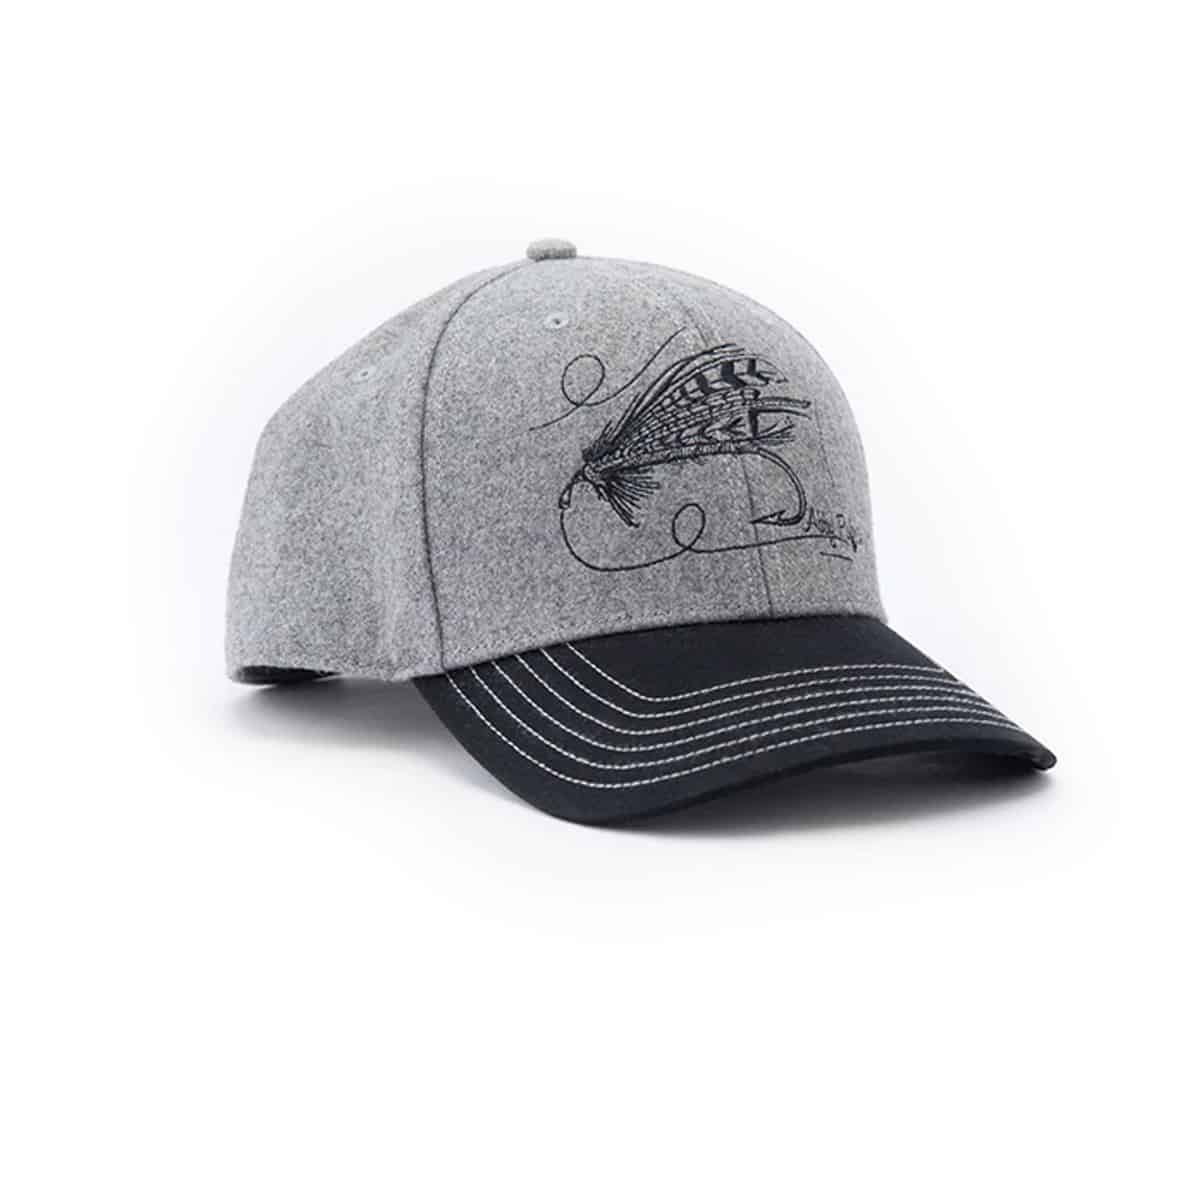 850029265146 art 4 all abby paffrath you are so fly fishing trucker hat three quarter right 